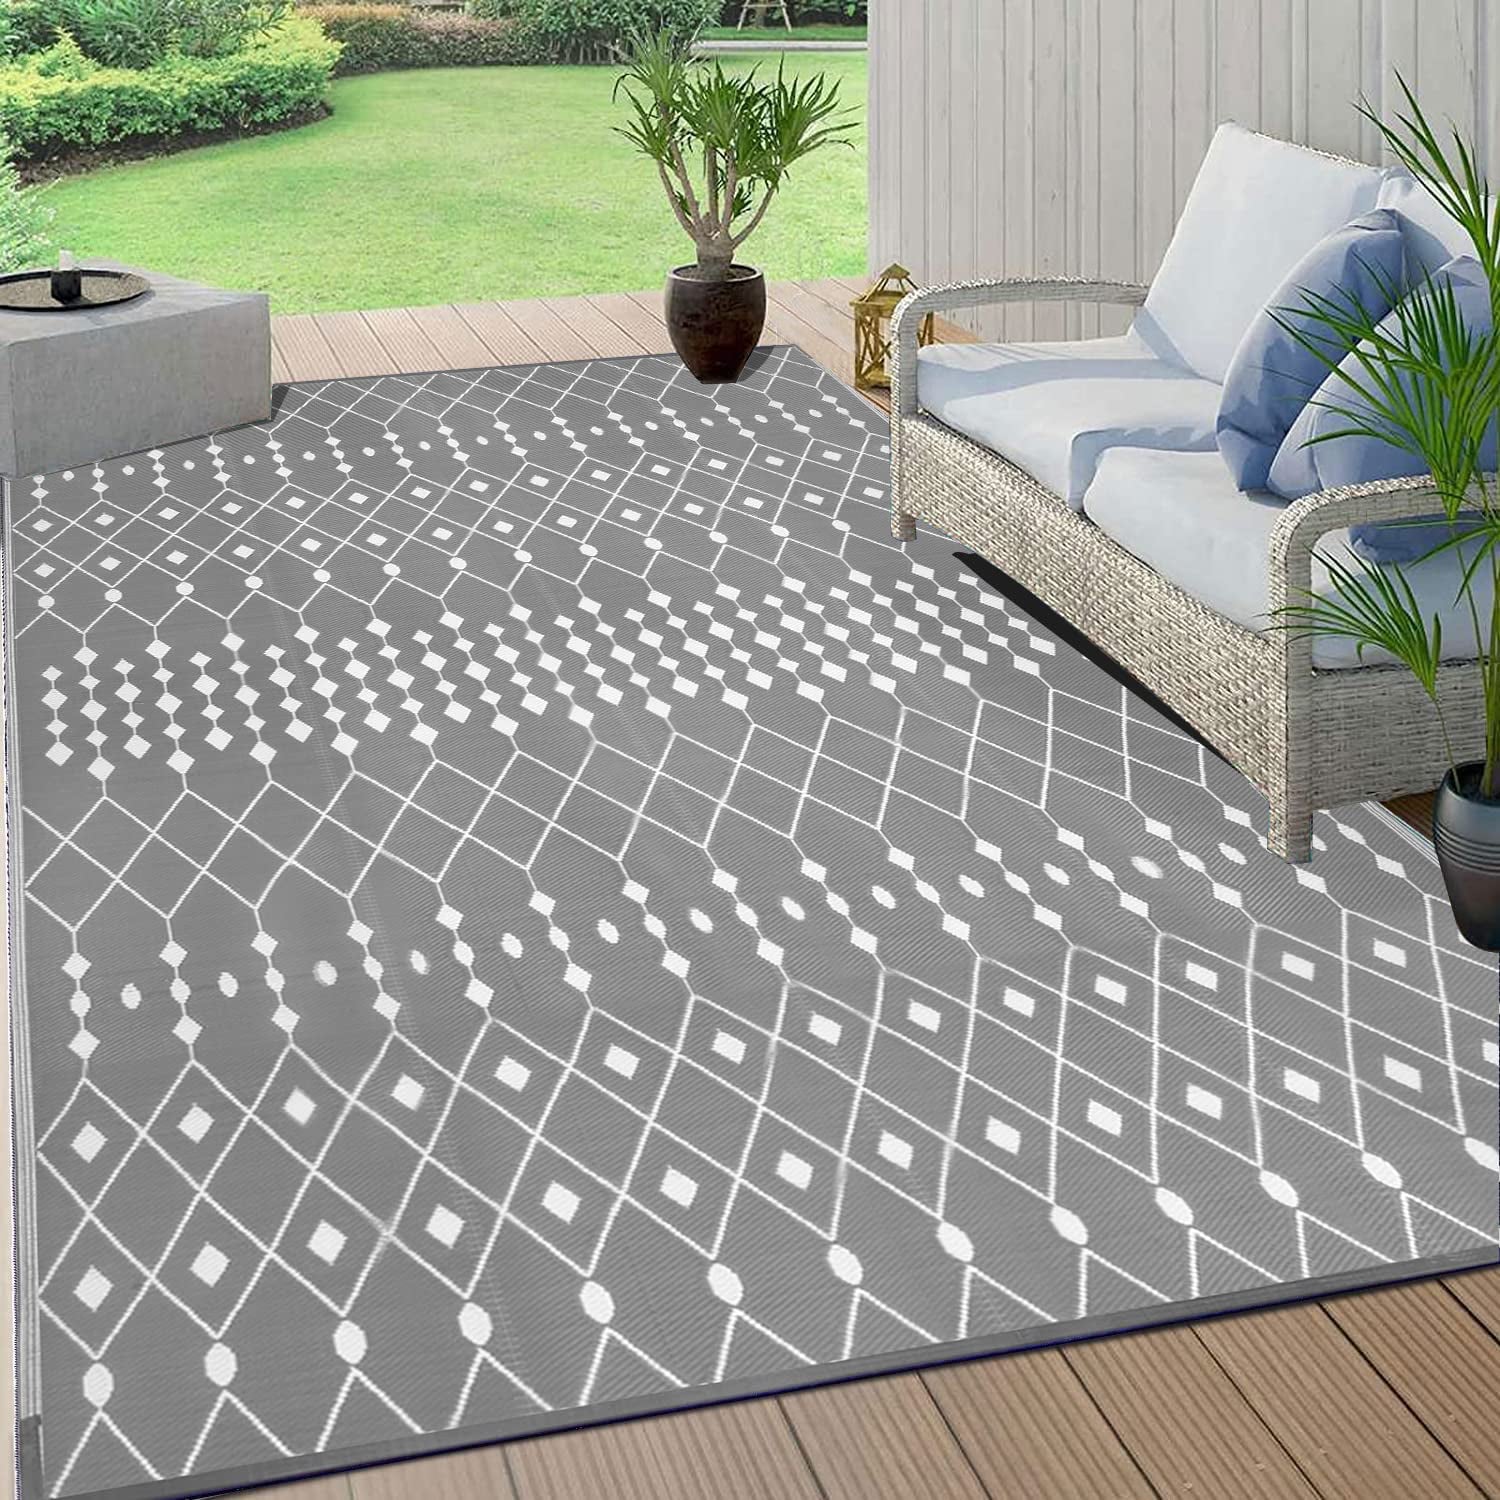 GENIMO Outdoor Rug for Patio Clearance,5'x8' Waterproof Mat,Reversible  Plastic Camping Rugs,Rv,Porch,Deck,Camper,Balcony,Backyard,Black & Gray